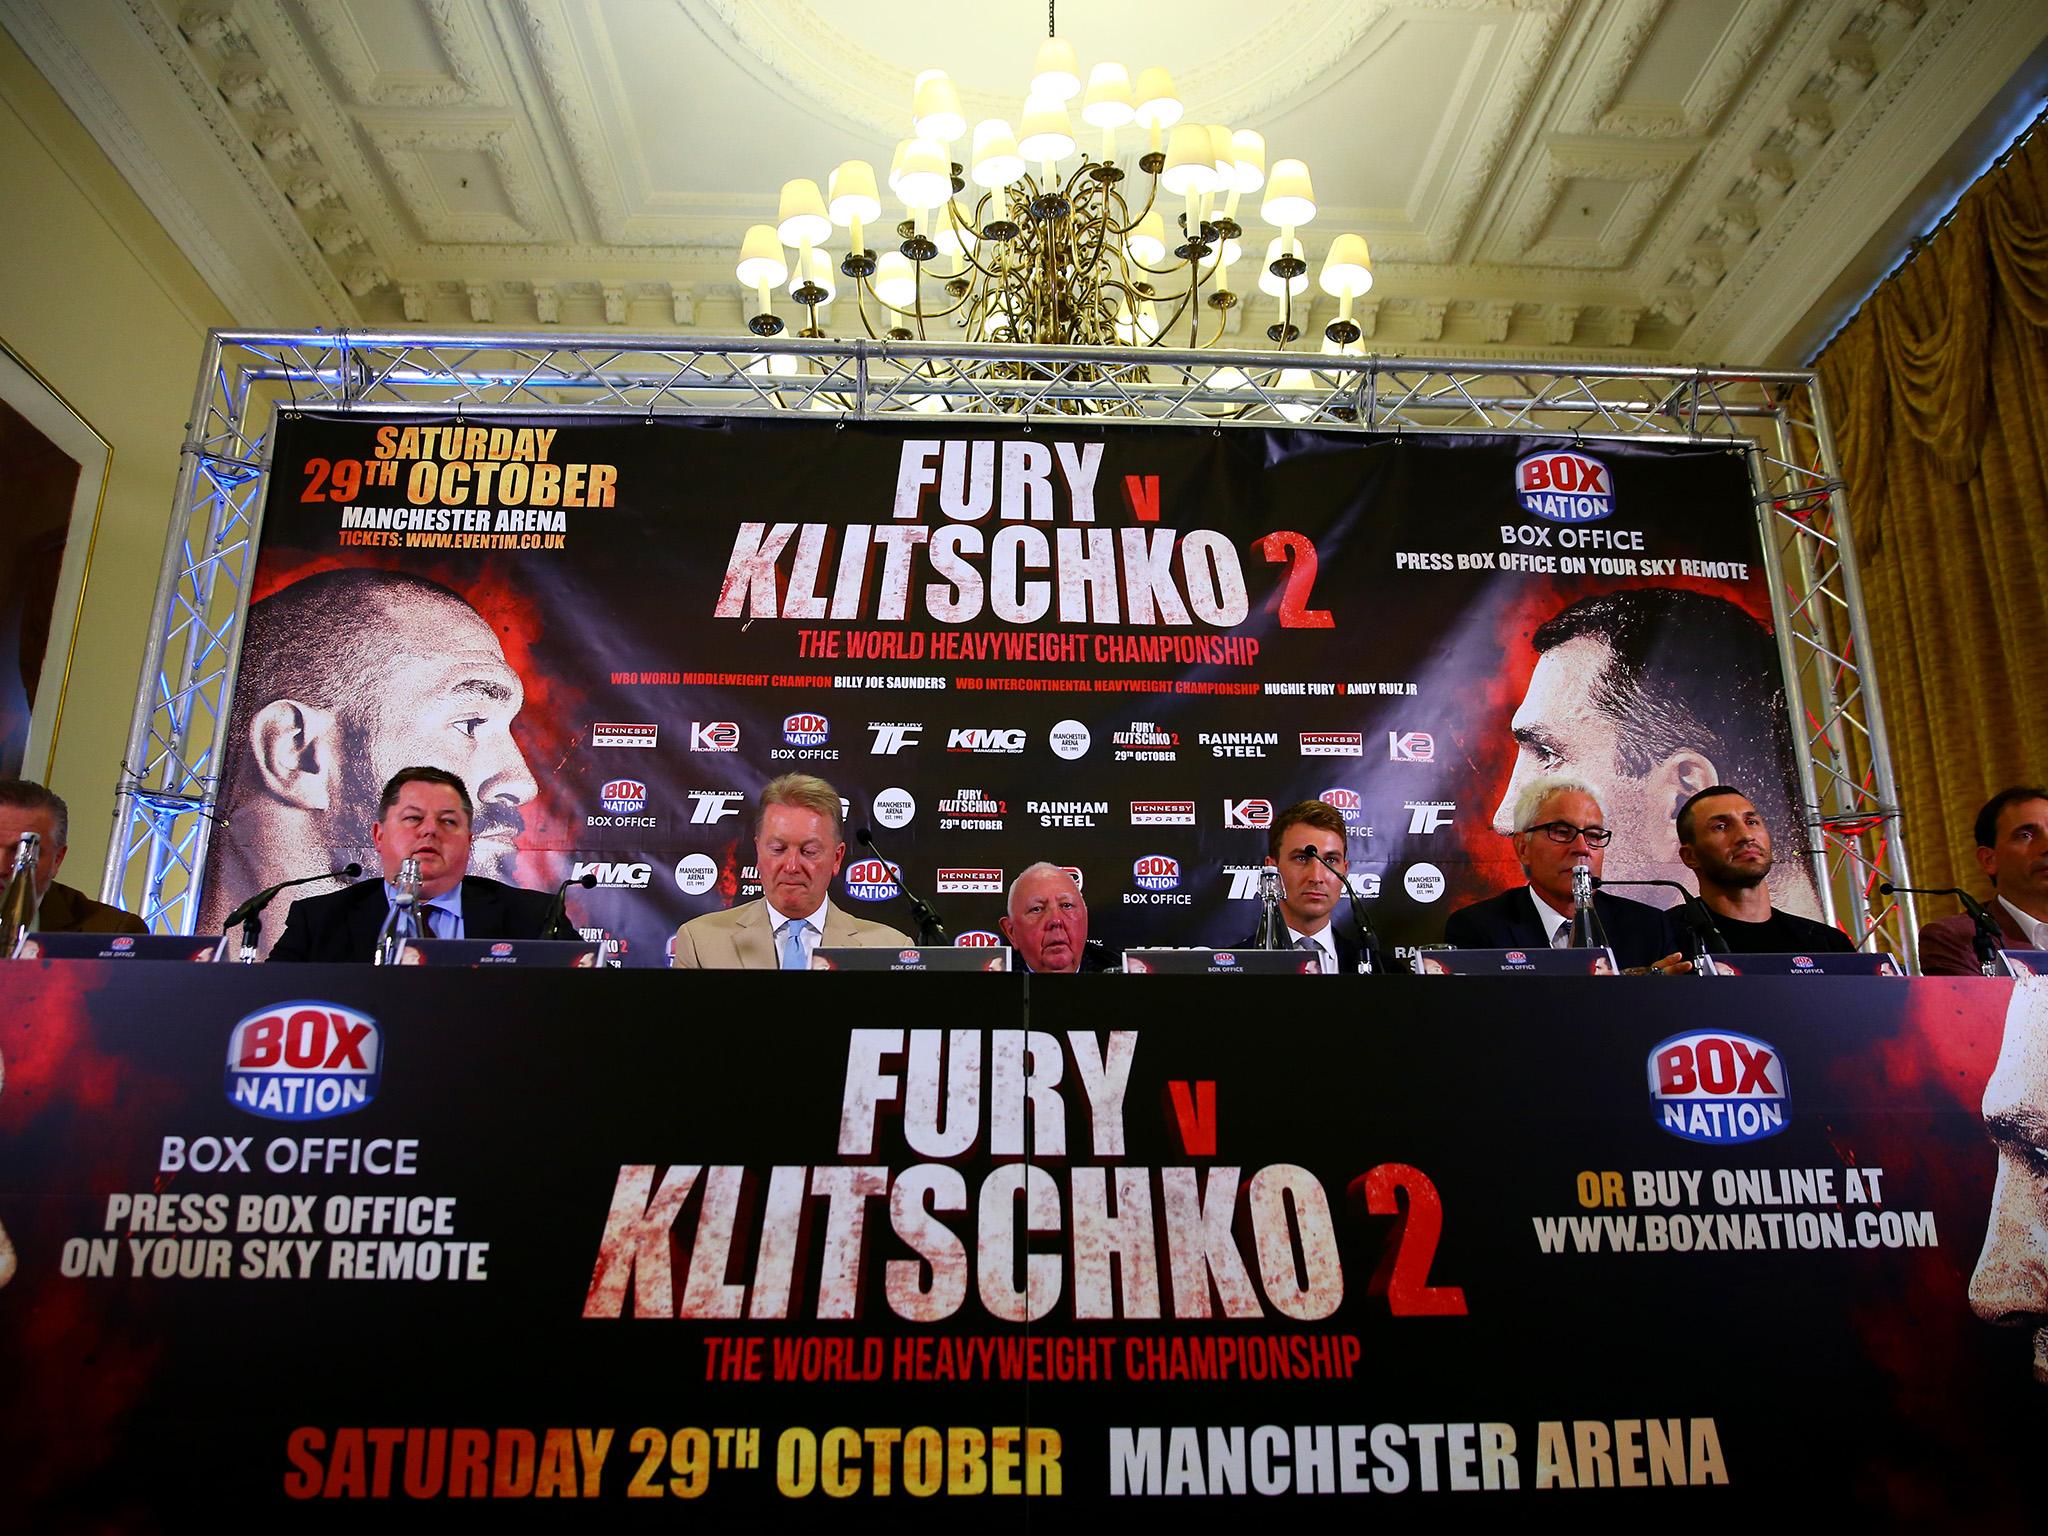 &#13;
Fury has not fought since defeating Klitschko (Getty)&#13;